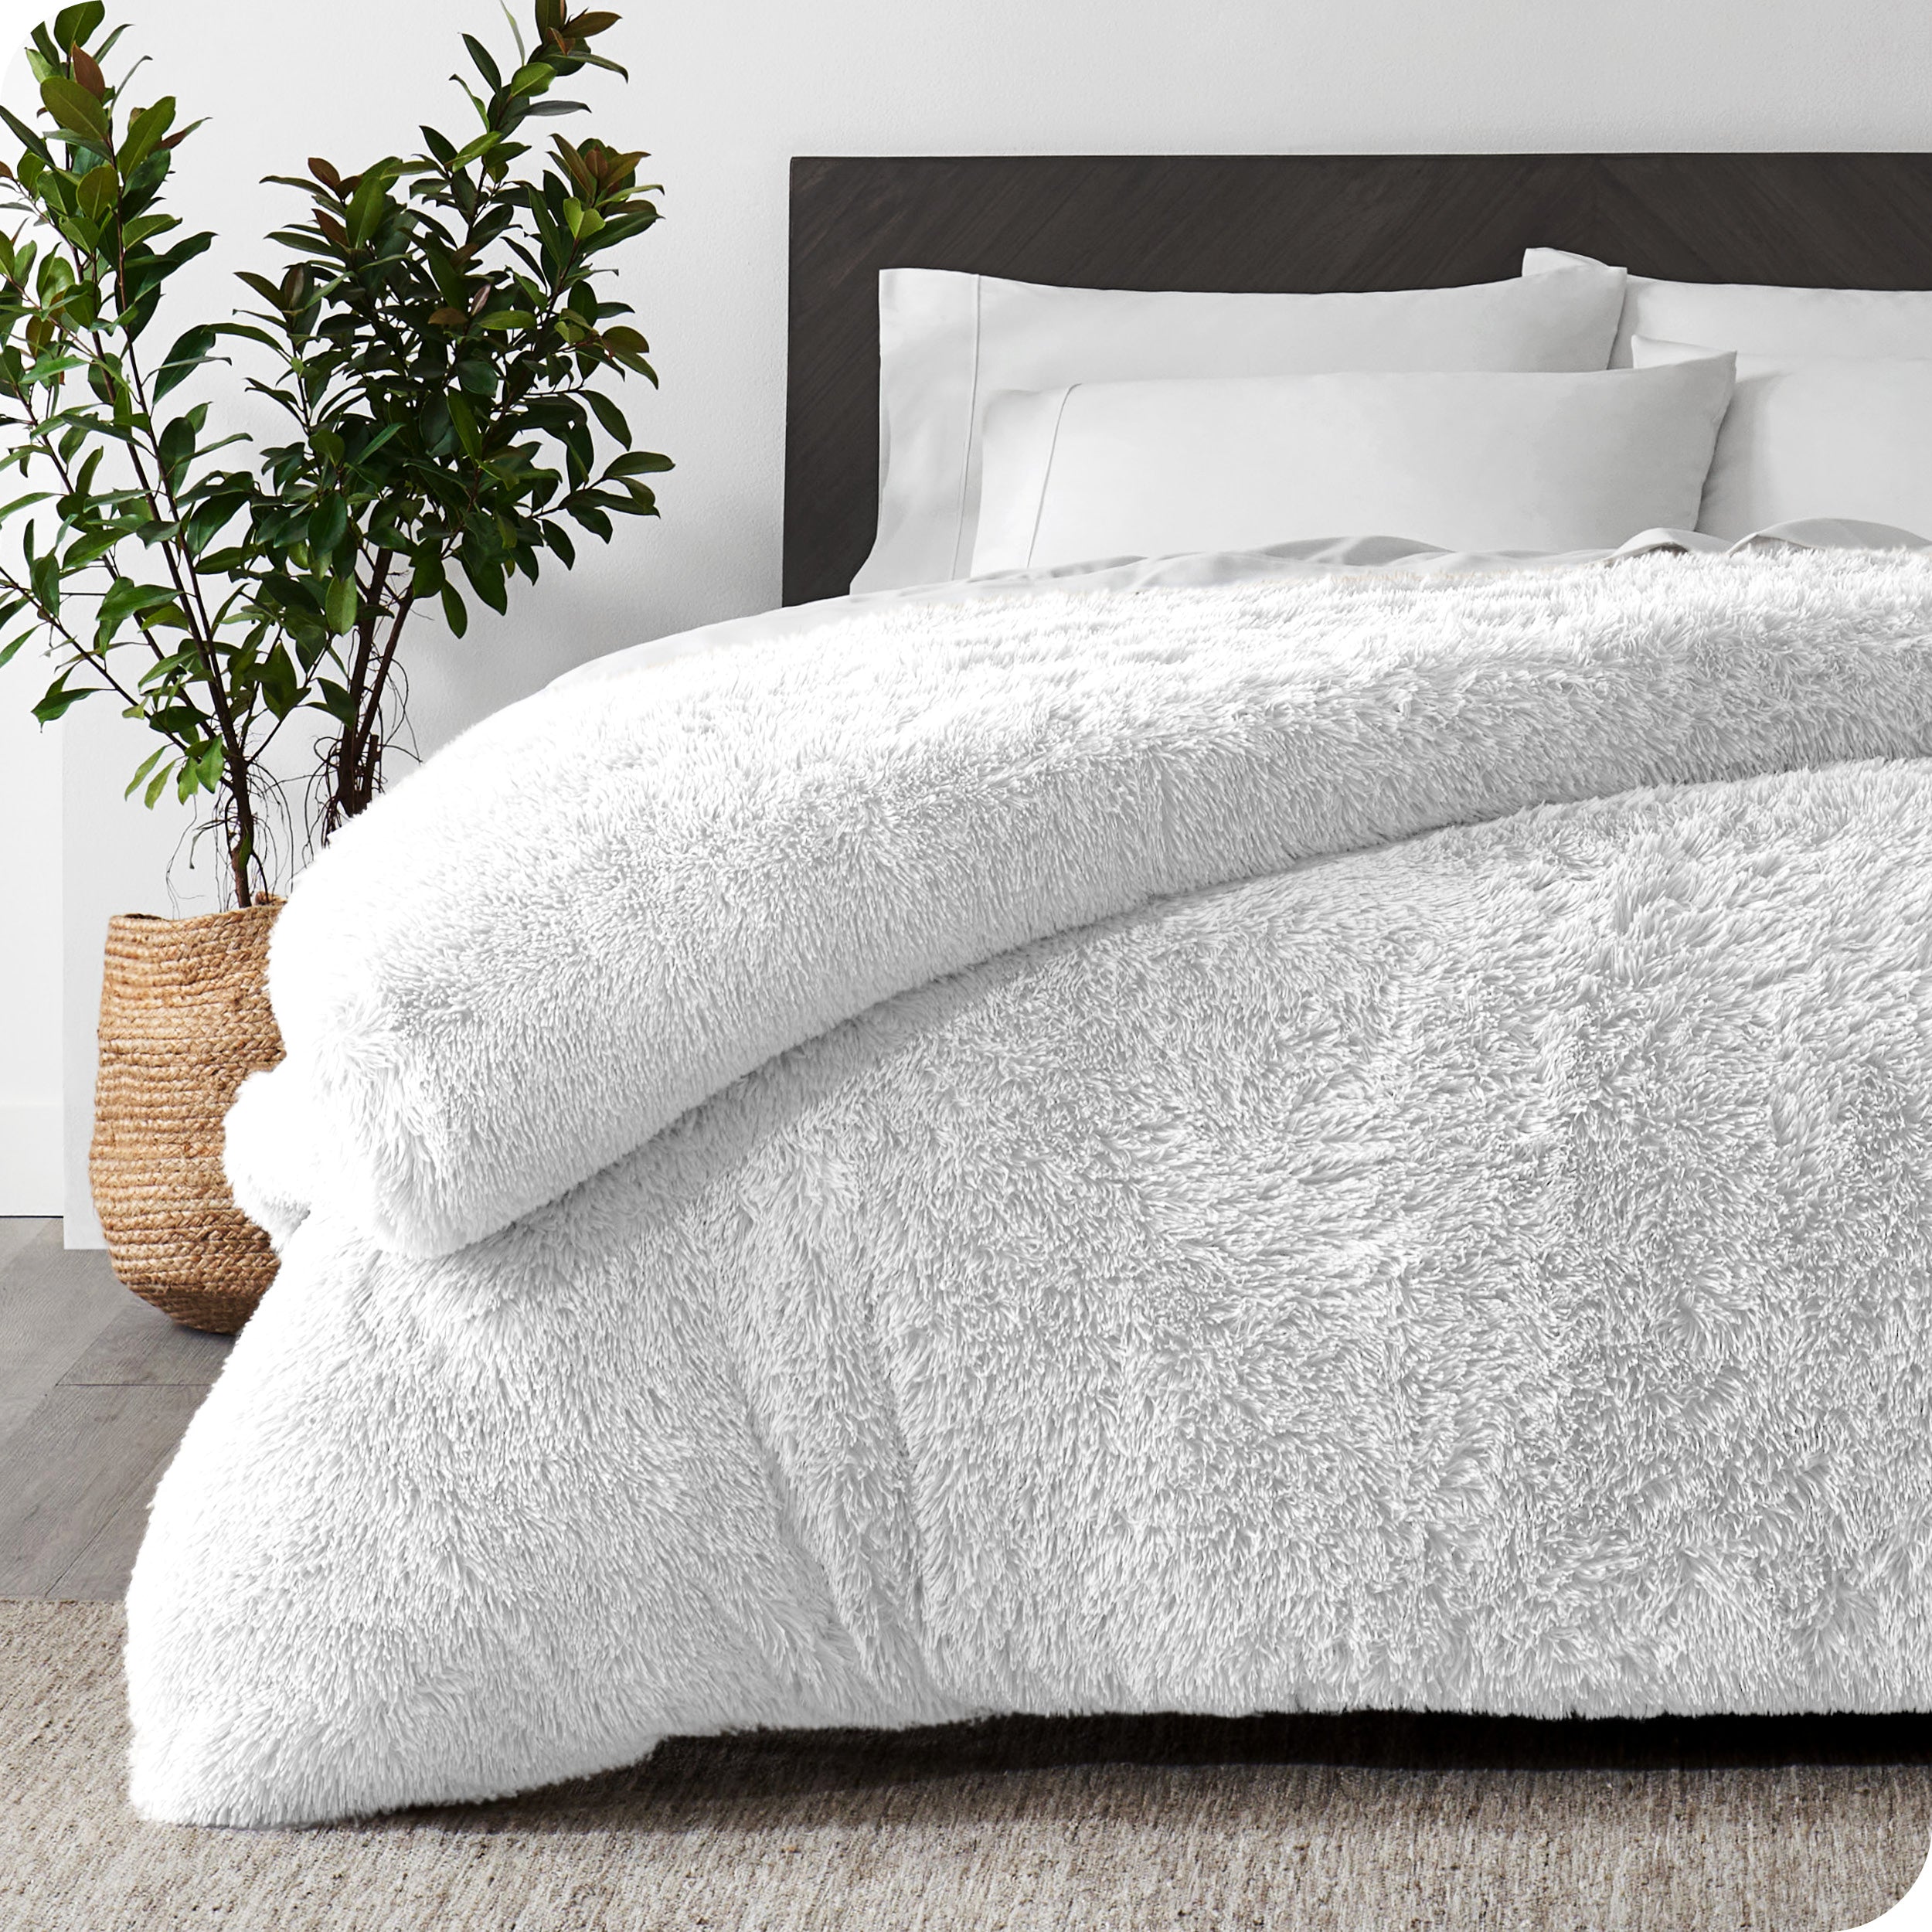 A white shaggy duvet cover on a bed with white sheets and pillowcases. A large plant is next to the bed.